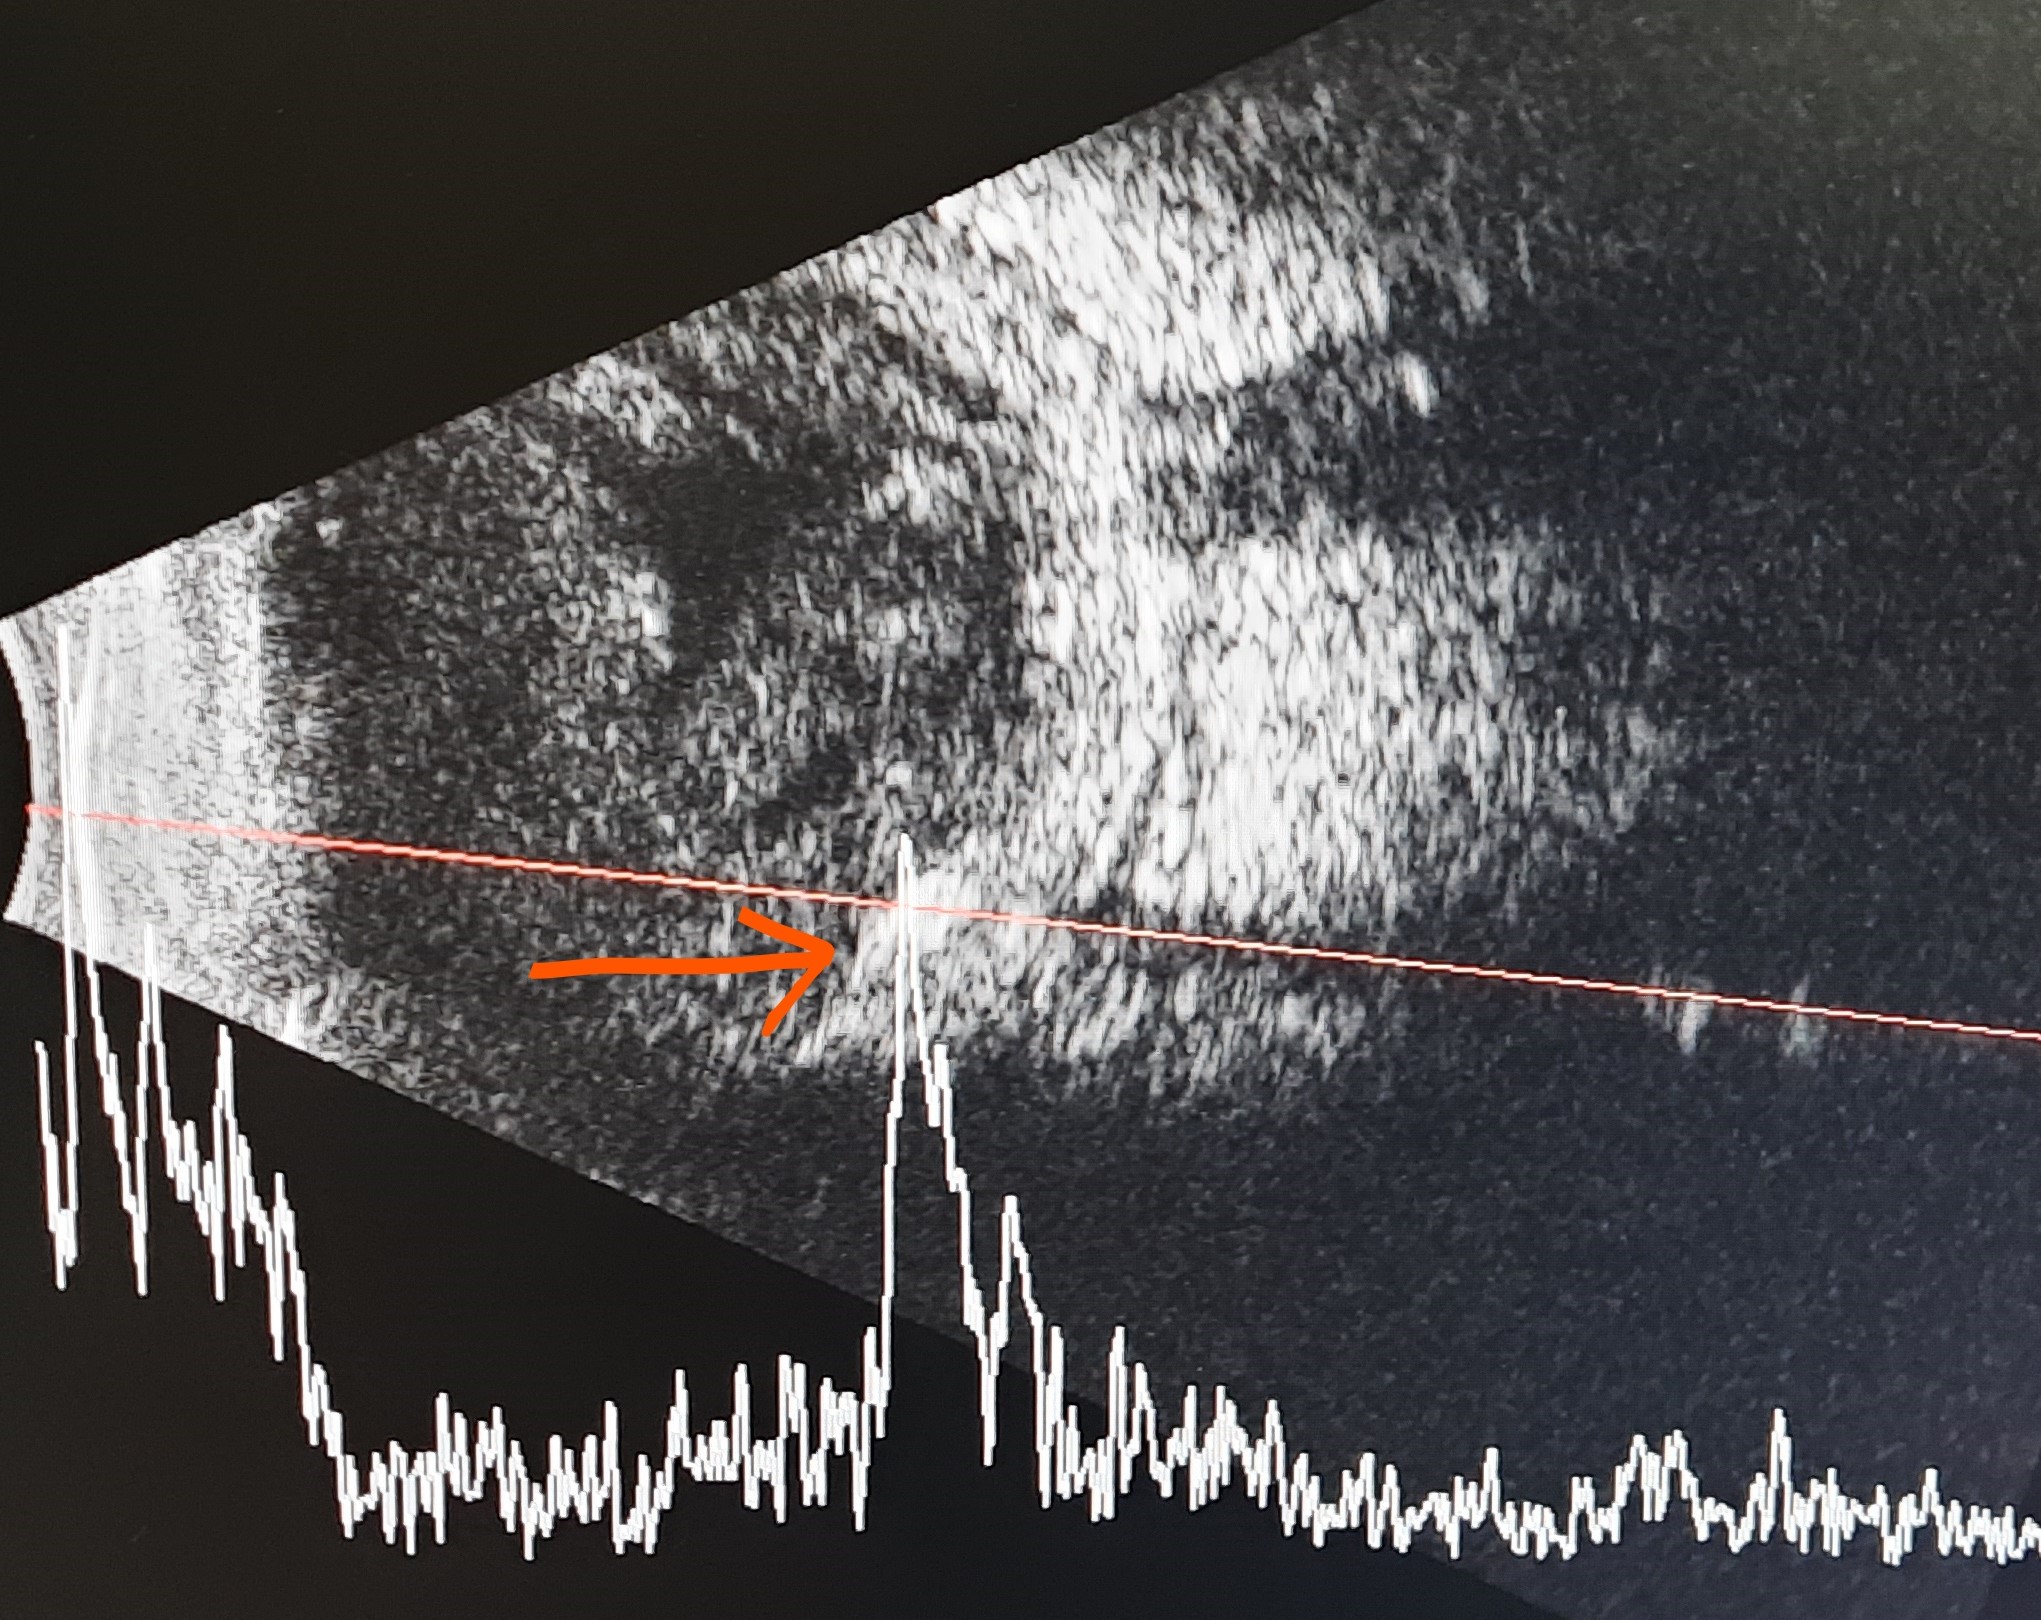 Ultrasound B scan of eye showing a metallic foreign body over the retina (orange arrow). It is hyperechoic, has 100% spike on A scan with a back shadow. 